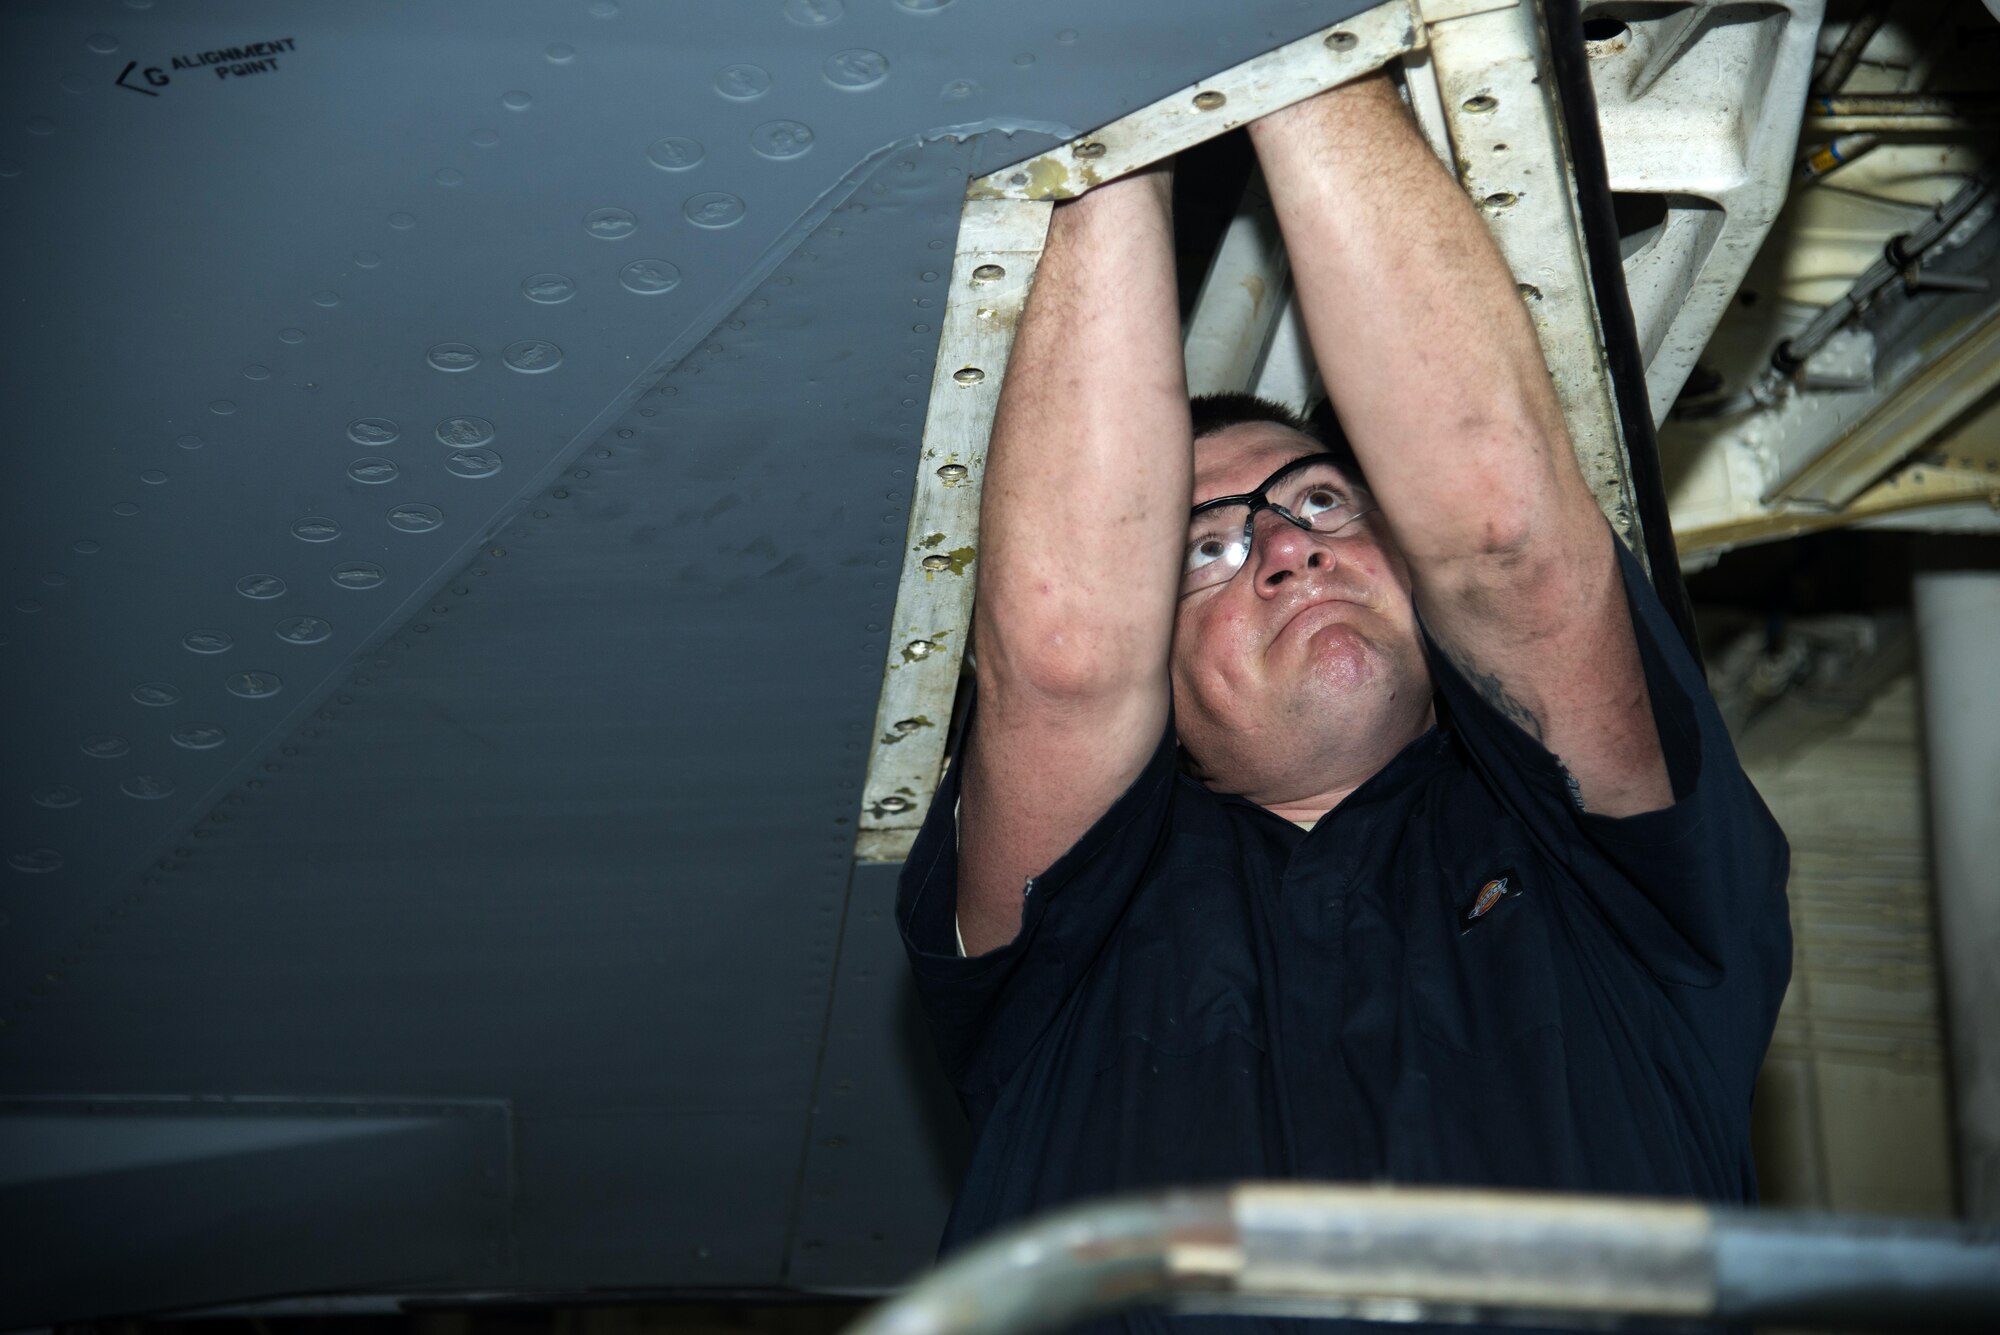 U.S. Air Force Tech. Sgt. Patrick Register, aerospace repair technician assigned to the 6th Maintenance Squadron, reaches inside of a KC-135 Stratotanker aircraft to check for cracks in the metal, April 10, 2017, at MacDill Air Force Base, Fla. Register followed technical orders for the task to ensure the job was completed timely and accurately. (U.S. Air Force photo by Airman 1st Class Rito Smith) 